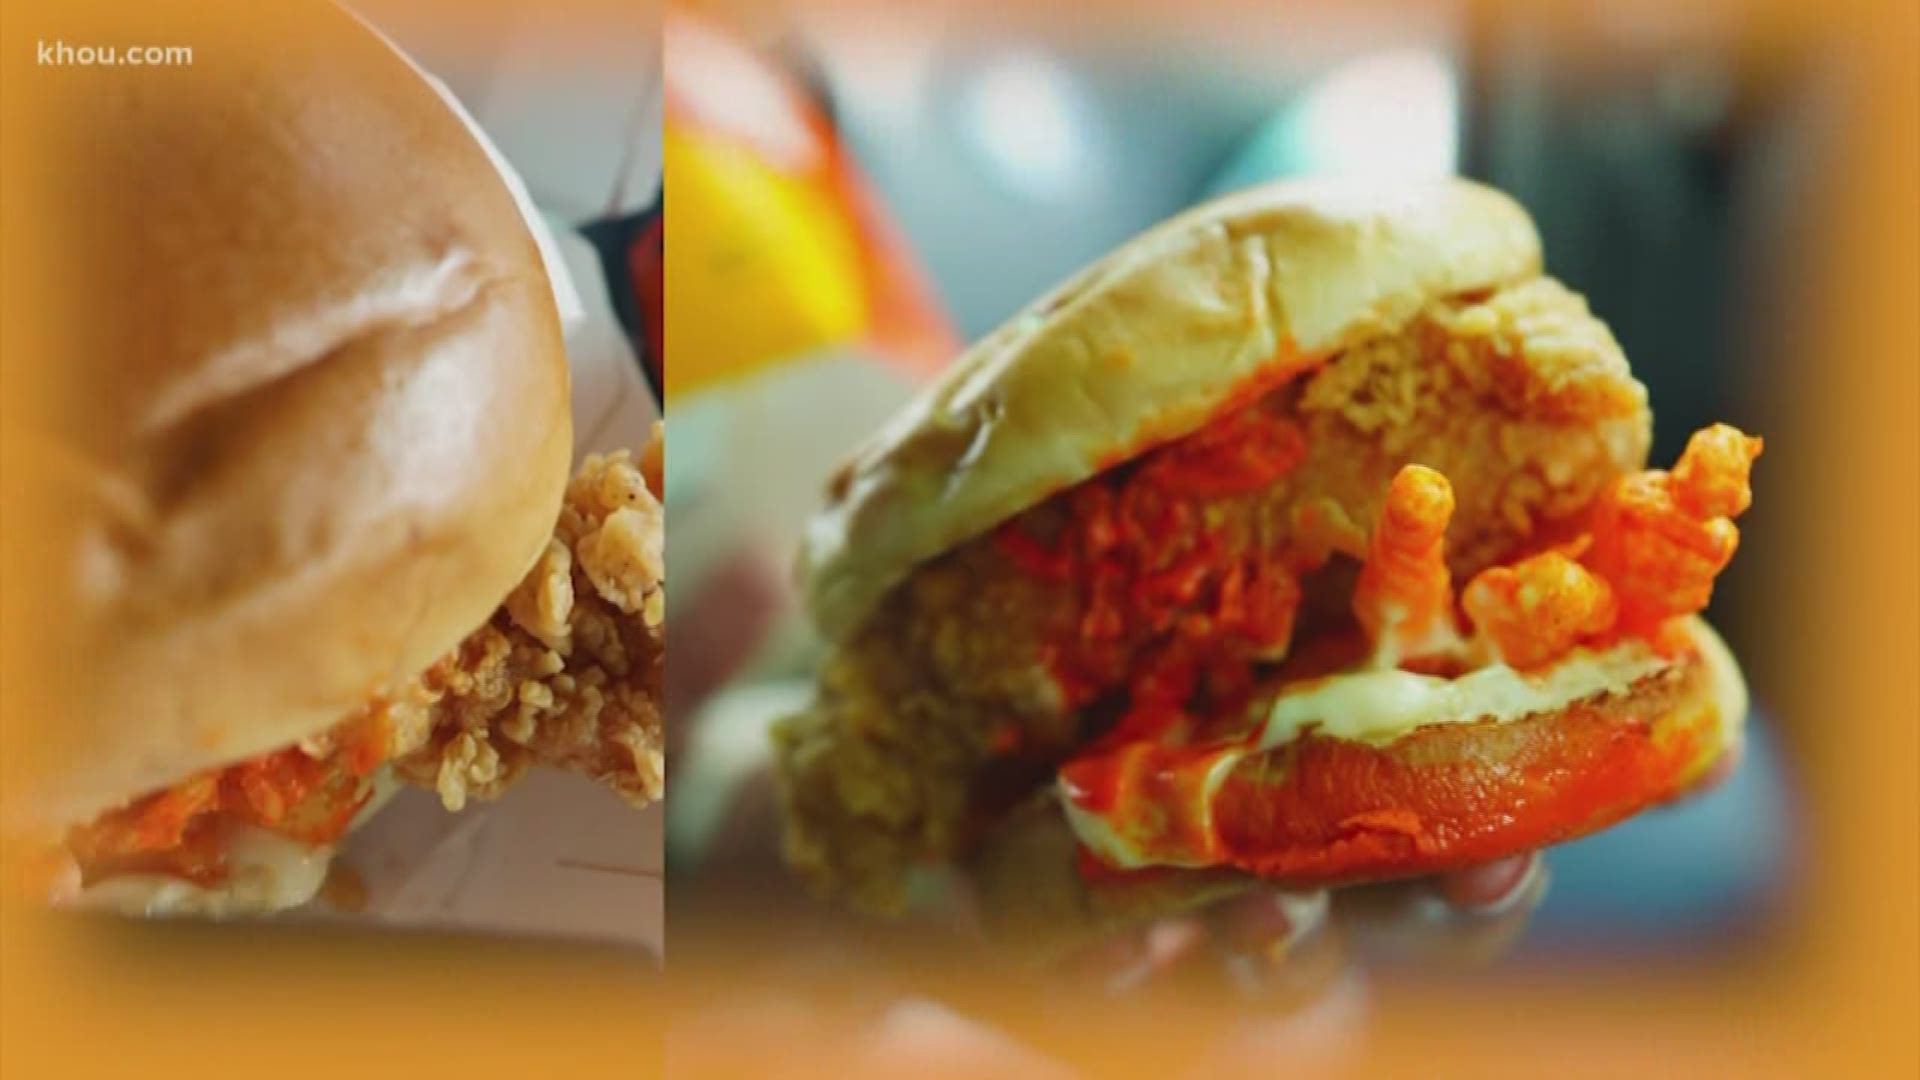 You’ve probably seen the commercial for the new Cheetos Sandwich from KFC. It’s a mashup that can’t be ignored!